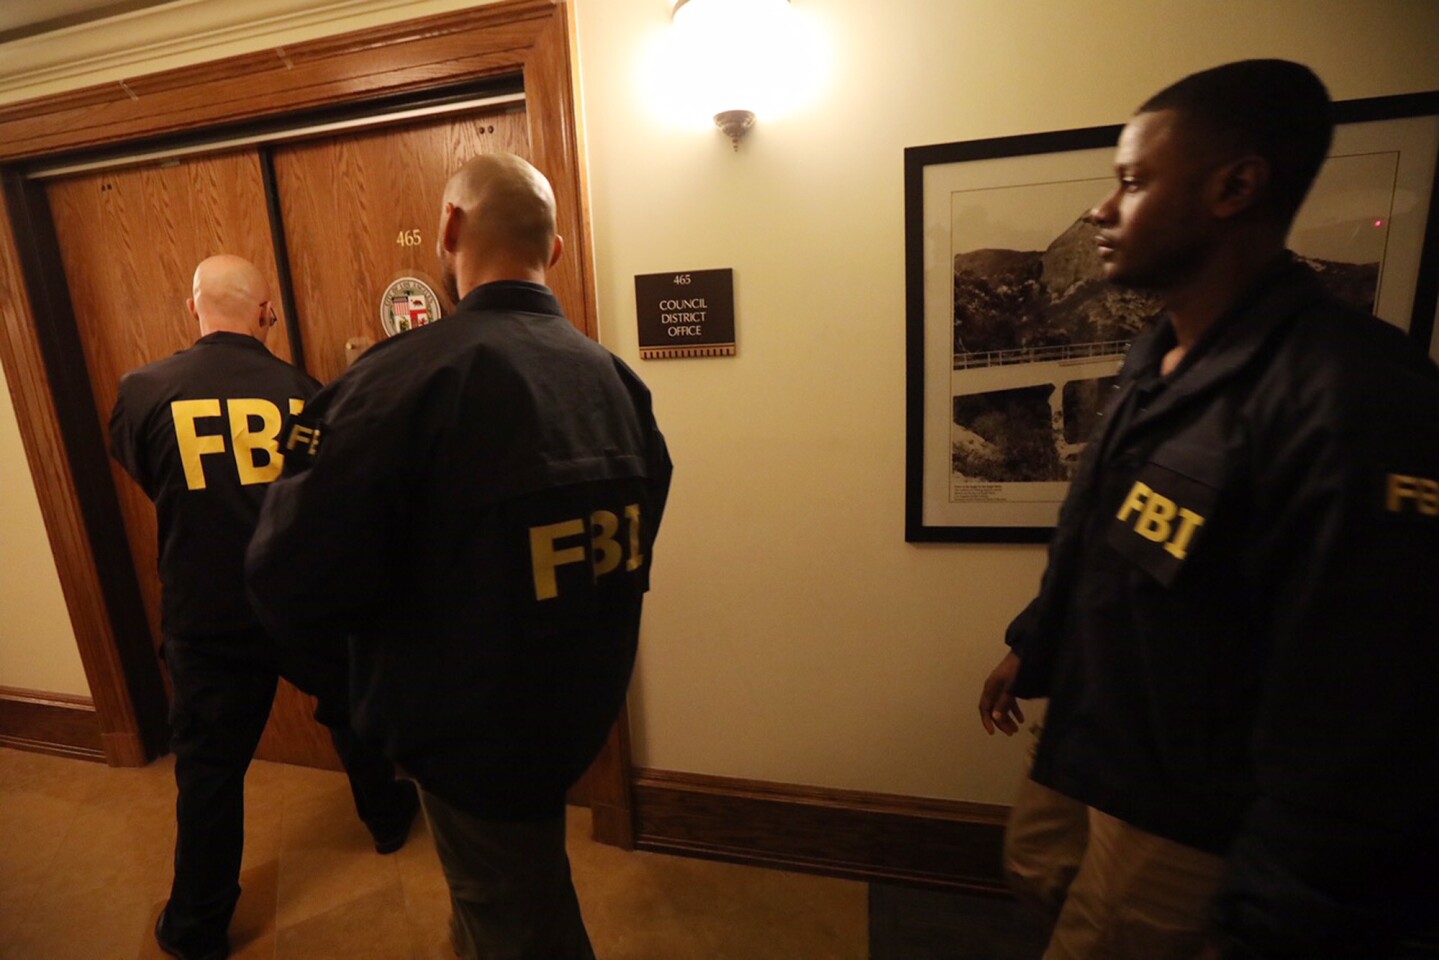 The FBI executes a search warrant at the City Hall office of Councilman Jose Huizar in downtown Los Angeles.